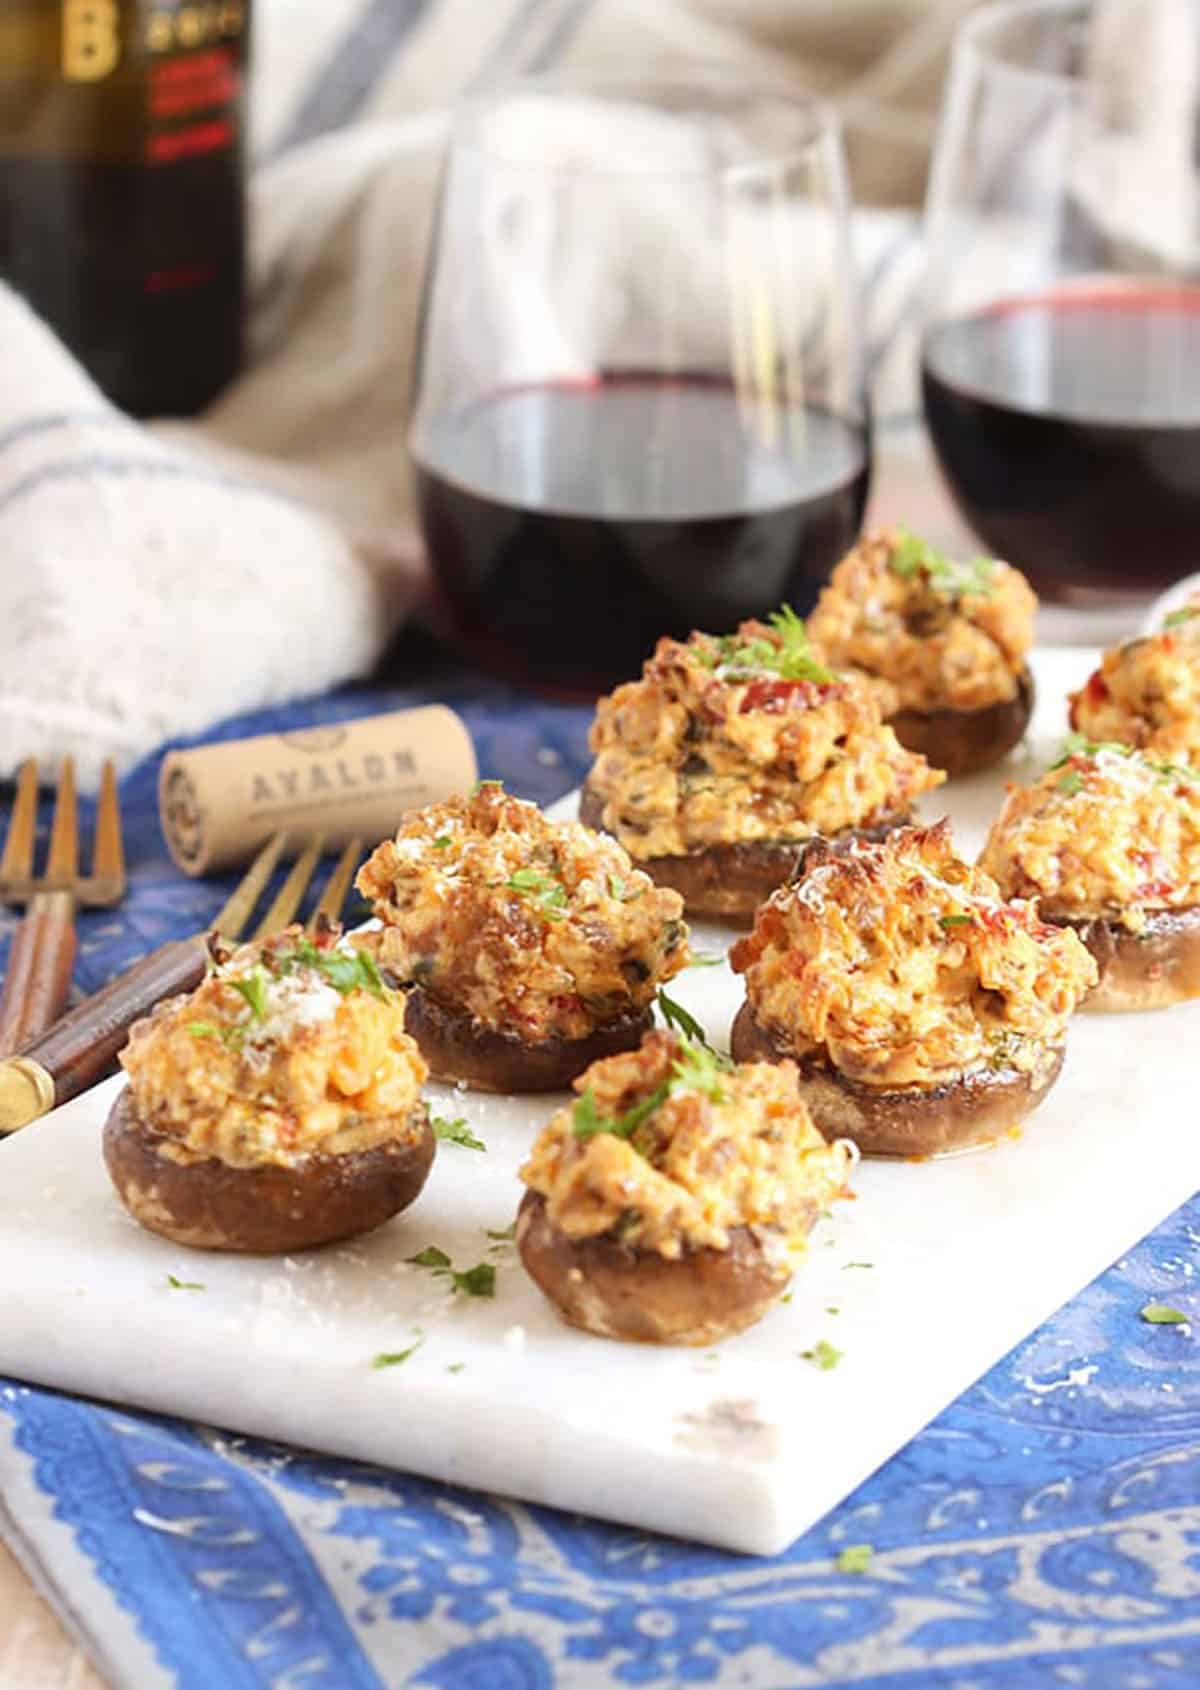 Sausage stuffed mushrooms on a marble platter with a bottle of wine in the background.